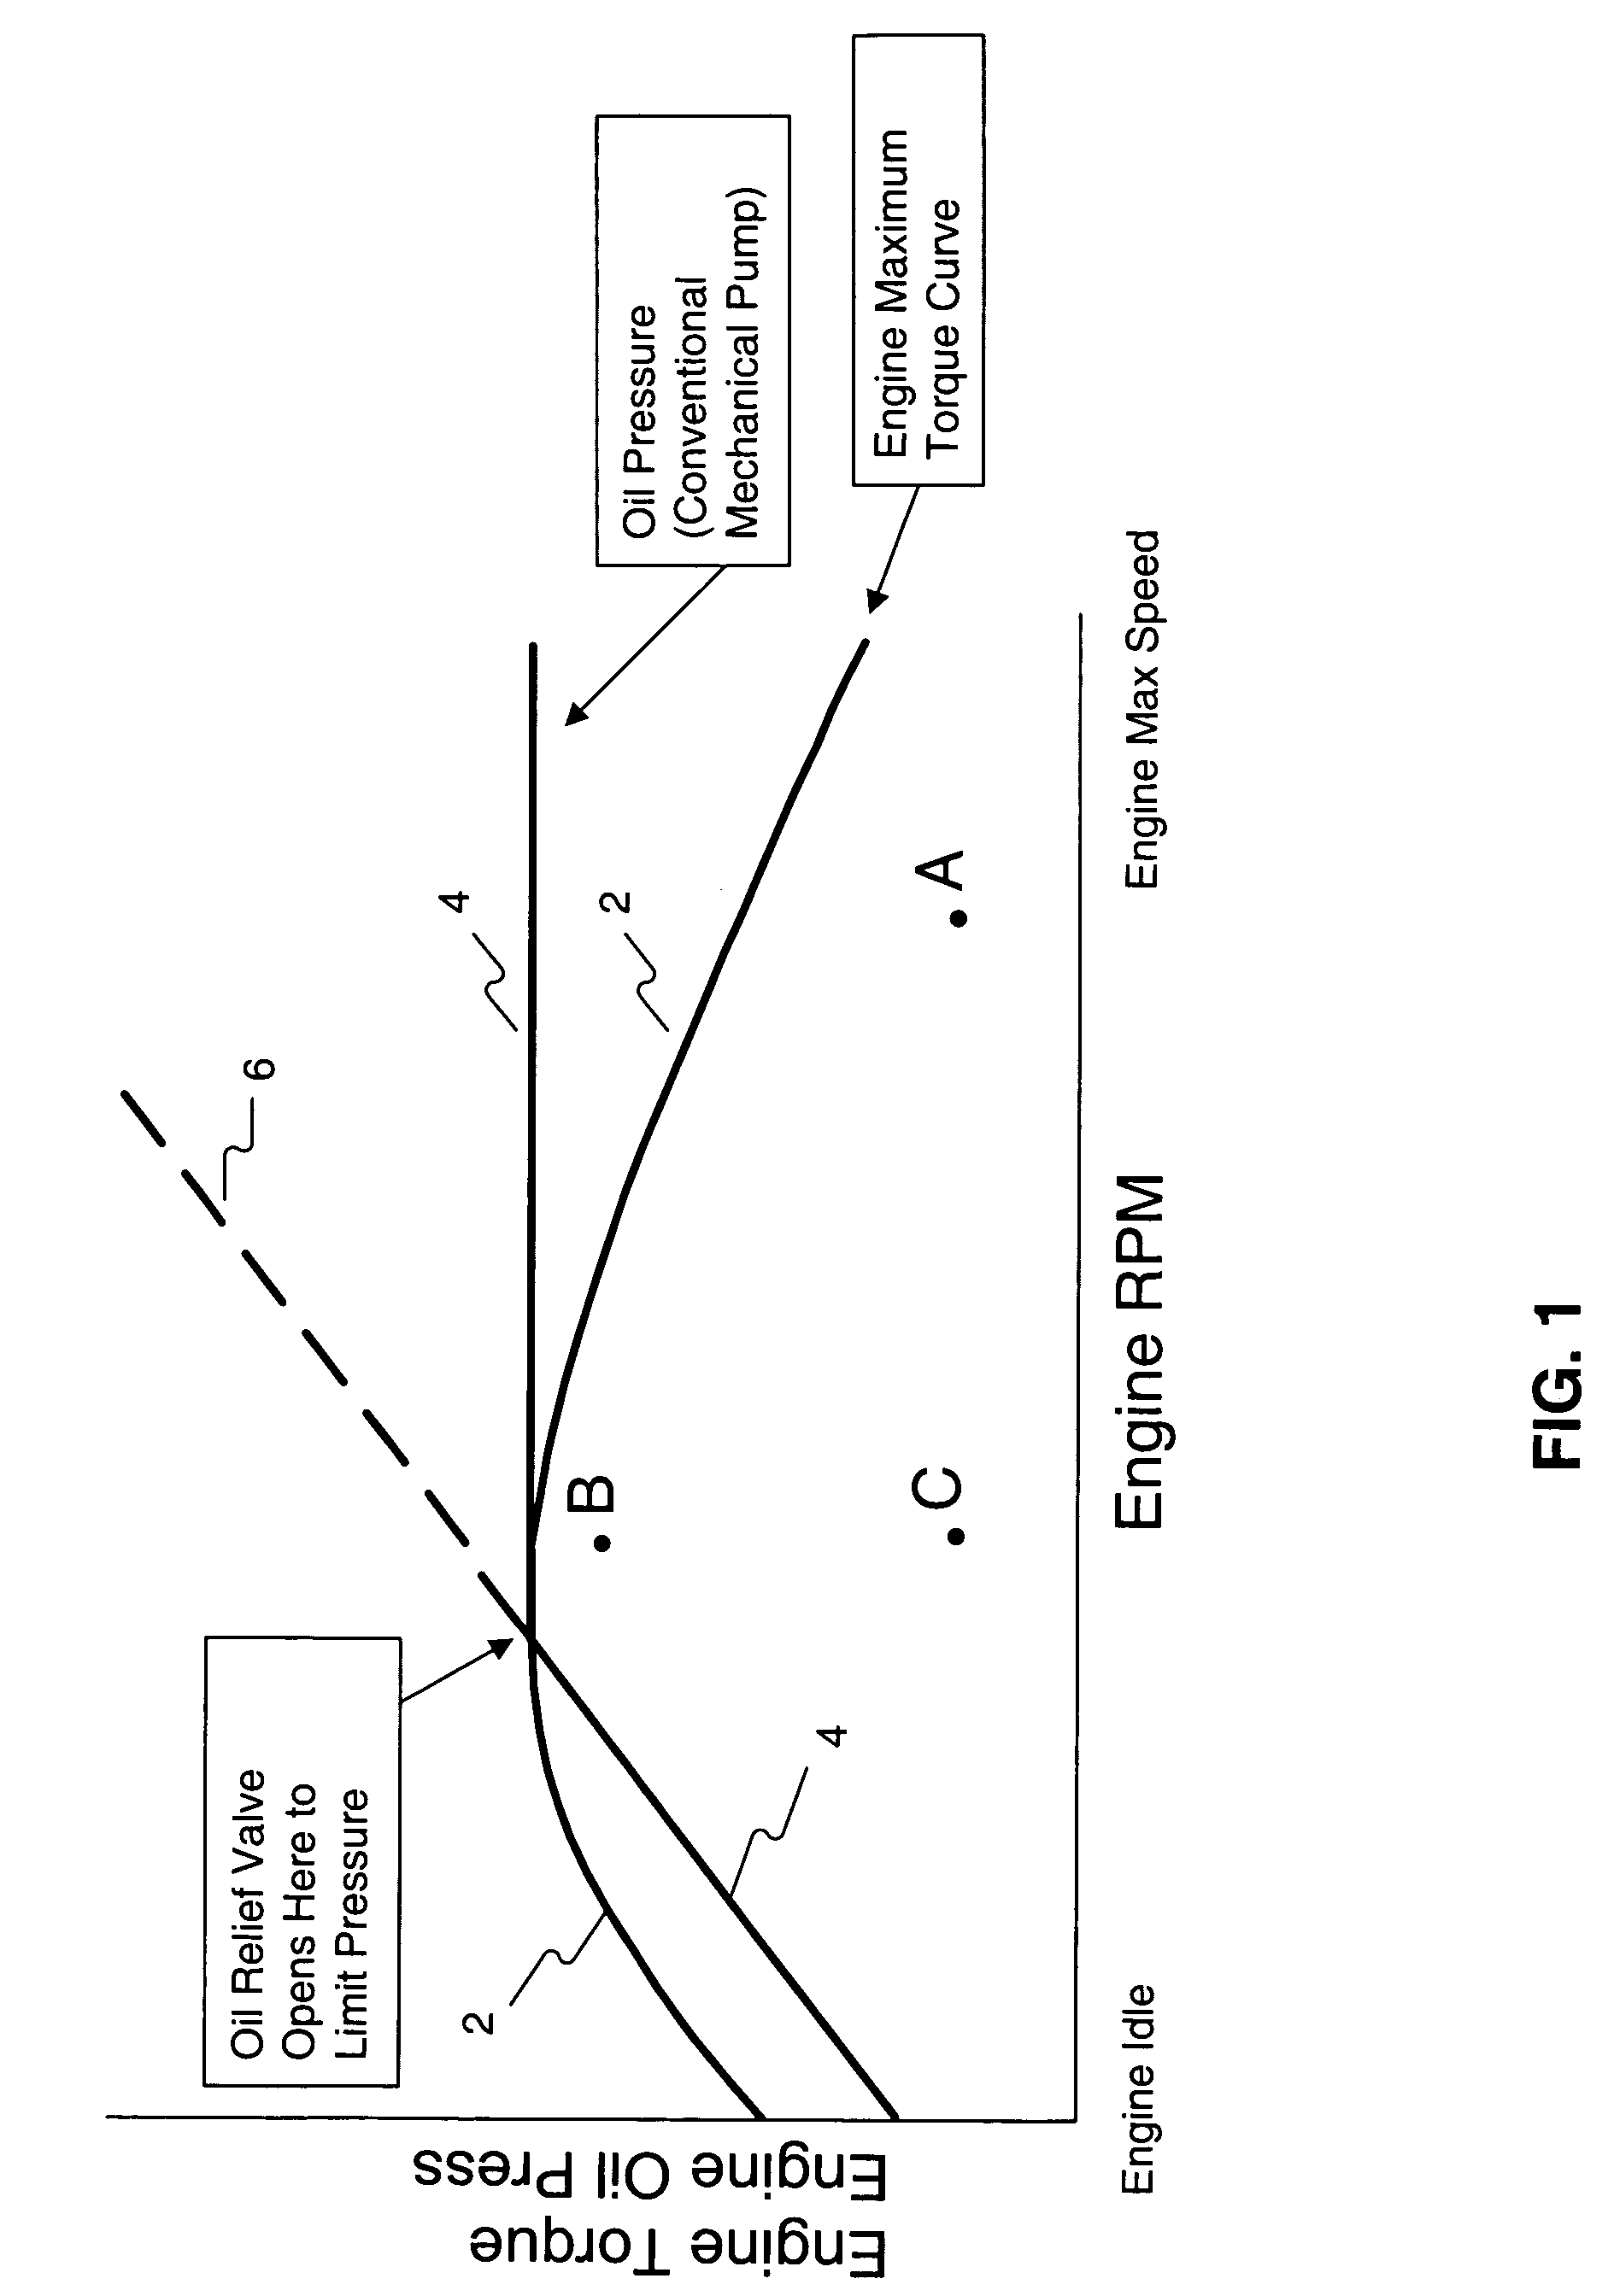 Fluid delivery control system